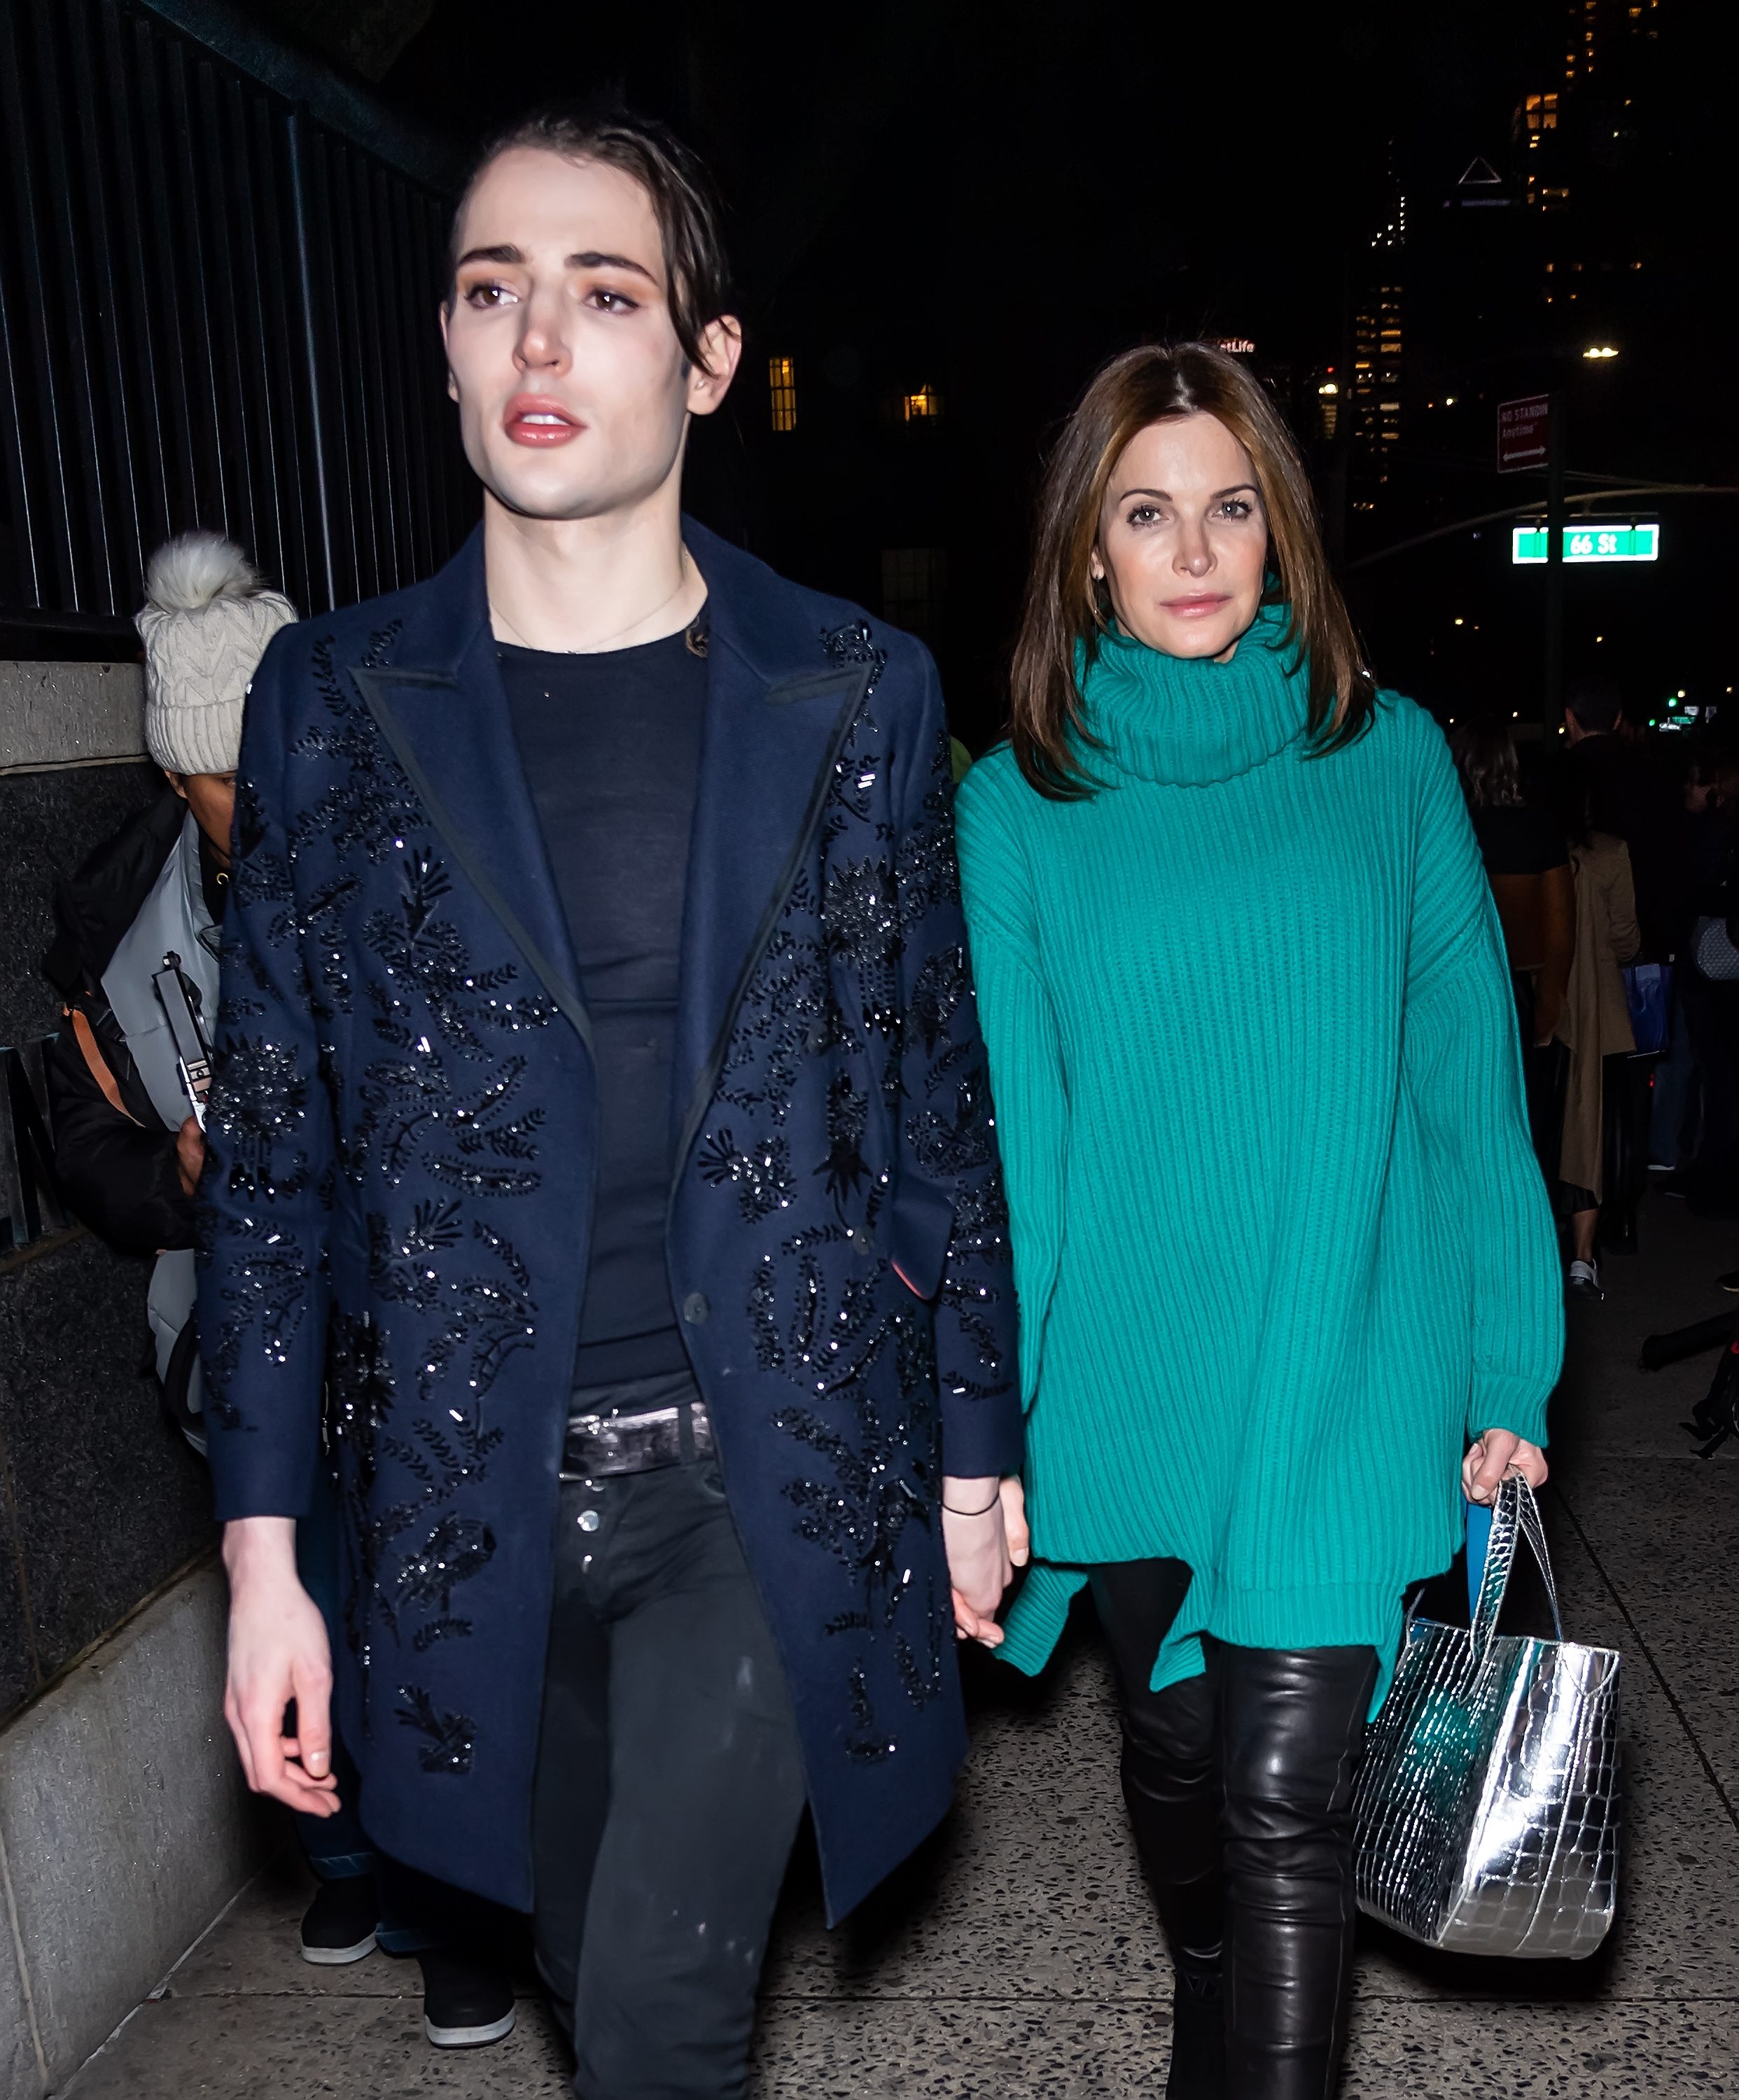 <p>Supermodel Stephanie Seymour and publisher Peter Brant lost son Harry Brant -- a socialite, model and beauty businessman -- at the start of 2021. Harry was found dead on Jan. 17, his family confirmed to The New York Times. The New York "it" boy died of an accidental prescription drug overdose after battling addiction issues for years, according to his family. "We will forever be saddened that his life was cut short by this devastating disease," they told the Times in a statement. "He achieved a lot in his 24 years, but we will never get the chance to see how much more Harry could have done." In the years before his death, Harry worked as a columnist for his father's Interview magazine, walked runways for notable fashion designers and, with big brother Peter II, launched a unisex makeup line with MAC.</p><p>In early 2023, Stephanie returned to modeling for the first time since Harry died, posing for the cover of <a href="https://www.wsj.com/articles/WP-WSJ-0000501355">WSJ. Magazine's Spring Women's Fashion Issue</a>. In the black-and-white spread, she sports a number of looks including a Saint Laurent by Hedi Slimane suit that her son bought for himself years ago. "If I think that Harry would love something, I do it, and it does help me with my grief. It still feels so good to put his clothes on," she told the magazine in her first interview since losing her son. She added of recently spending the holidays with her family, sans Harry, "I try to just be present. For me with holidays, and I'm sure a lot of other people can relate, it's difficult now because I'm always thinking of what's missing."</p>